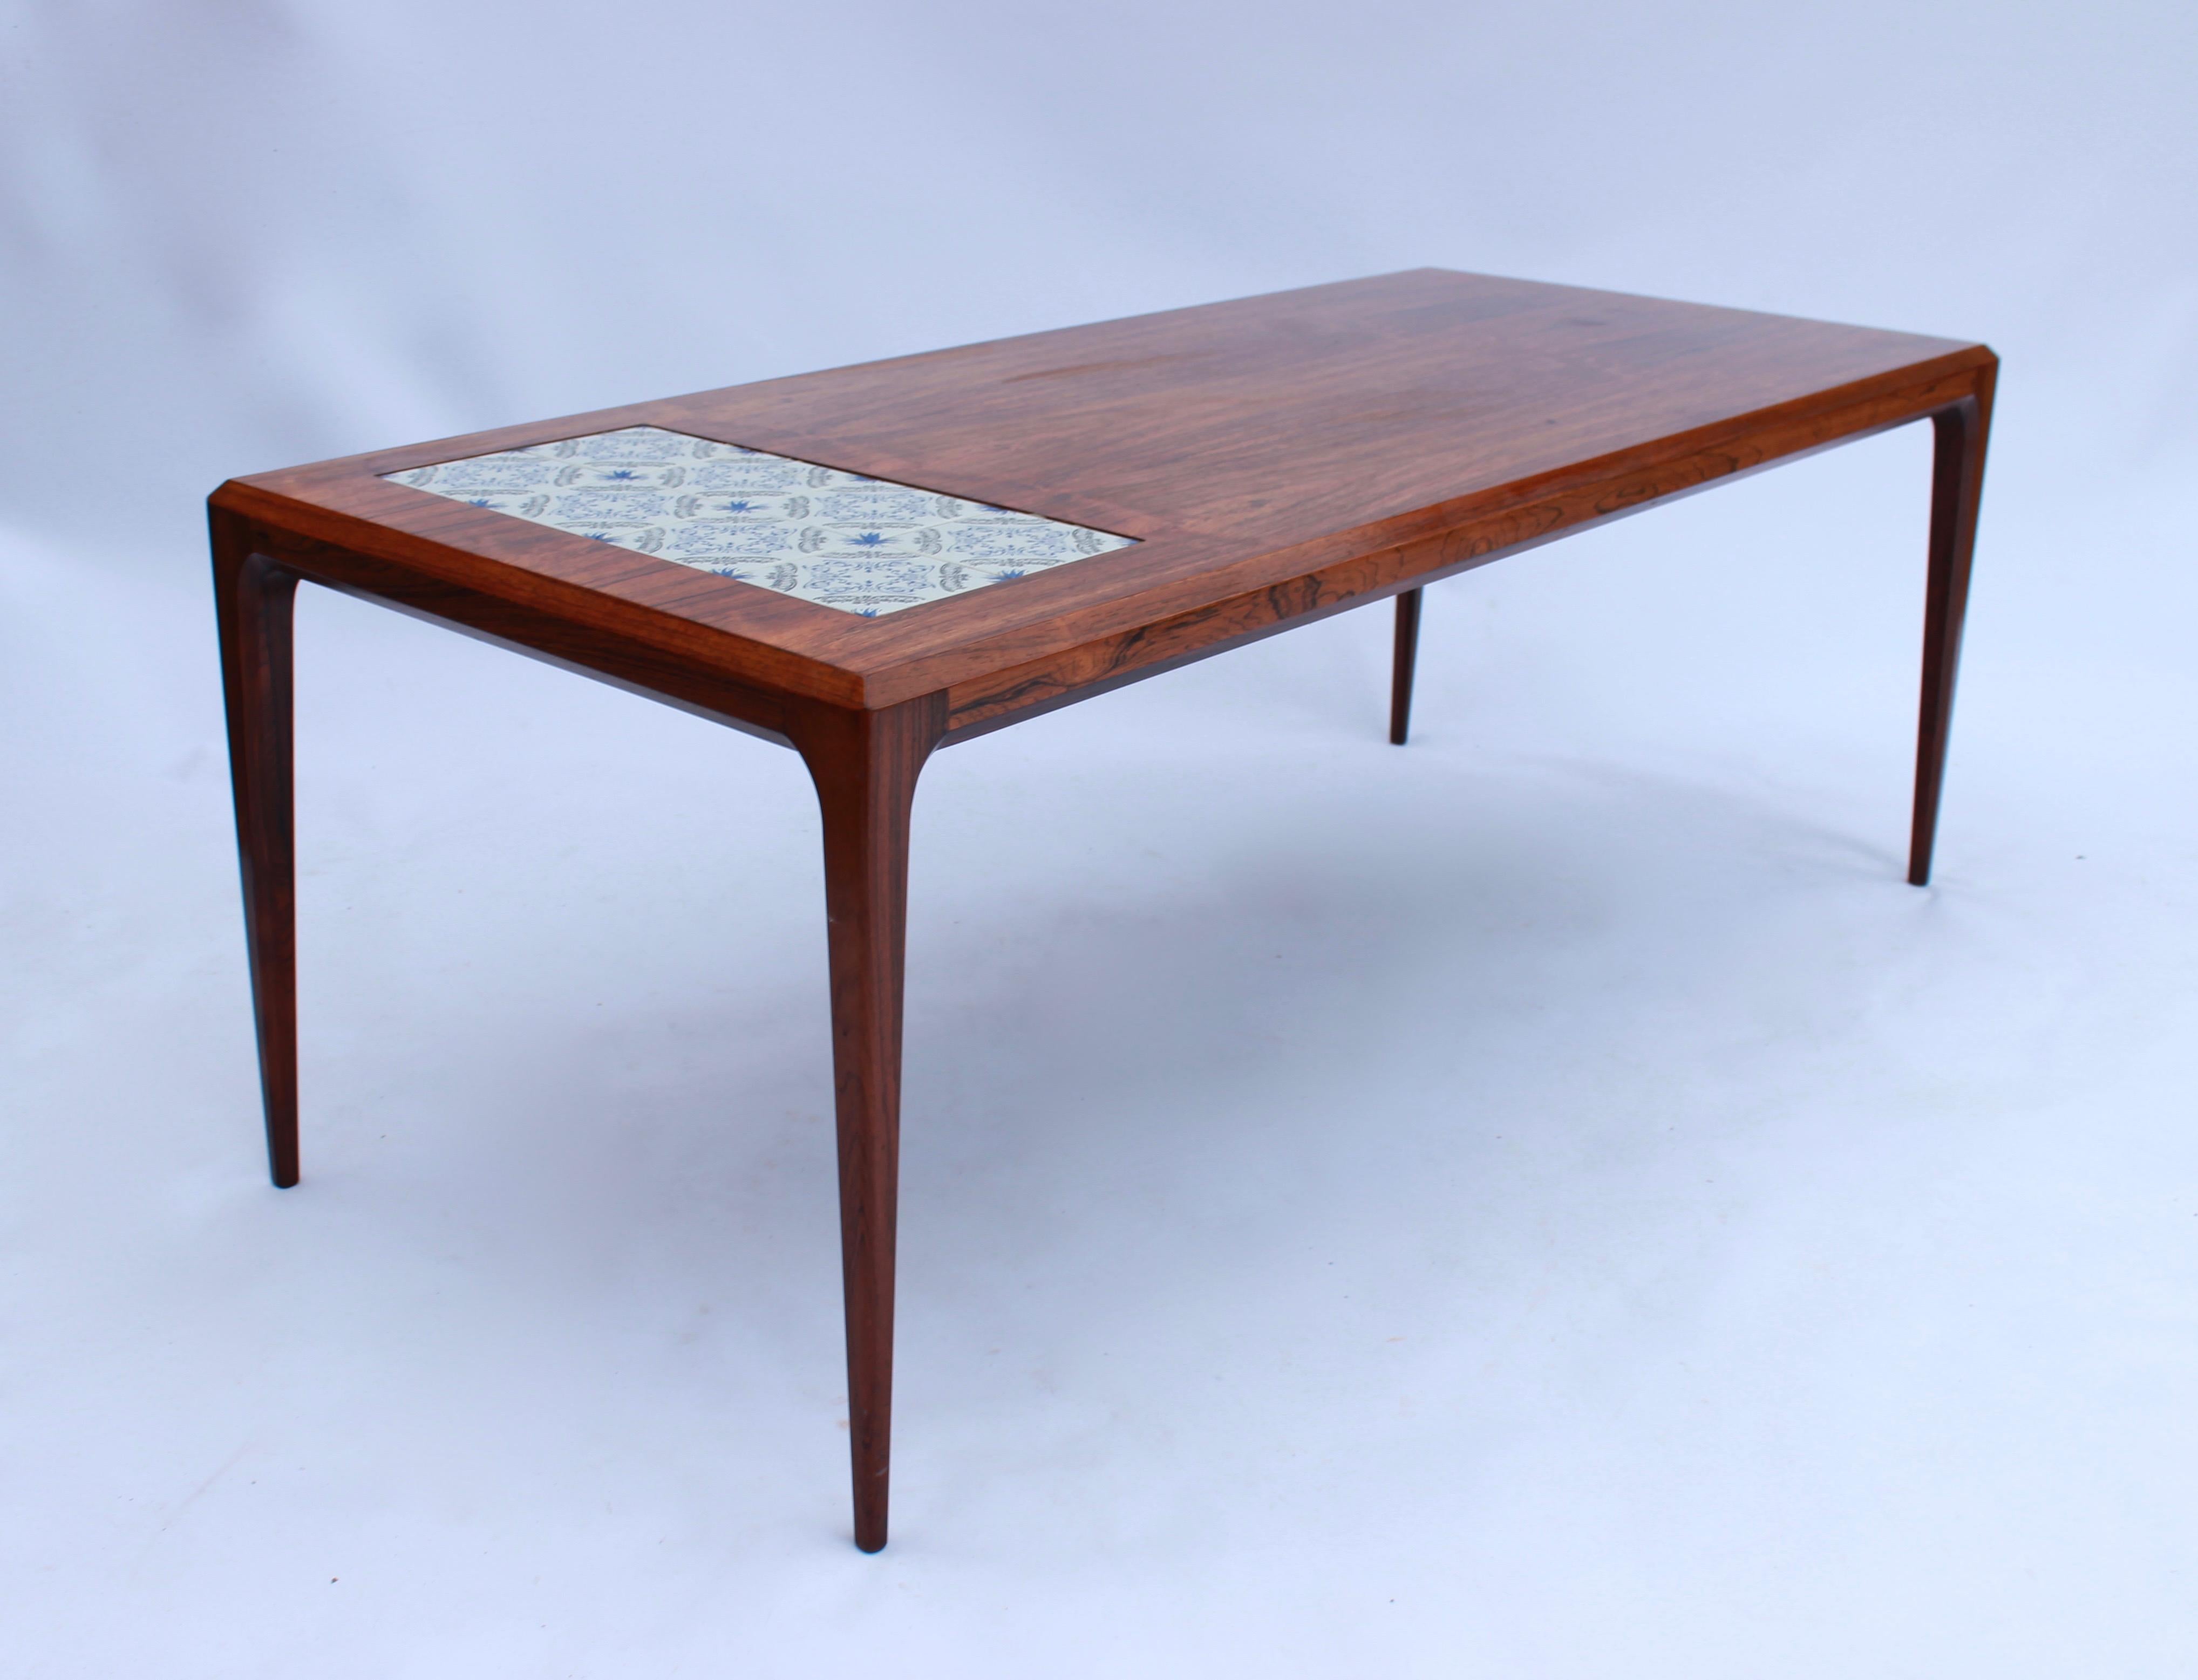 Coffee table in rosewood with Royal Copenhagen tiles designed by Johannes Andersen and manufactured by Silkeborg Furniture factory in the 1960s. The table is in great vintage condition.